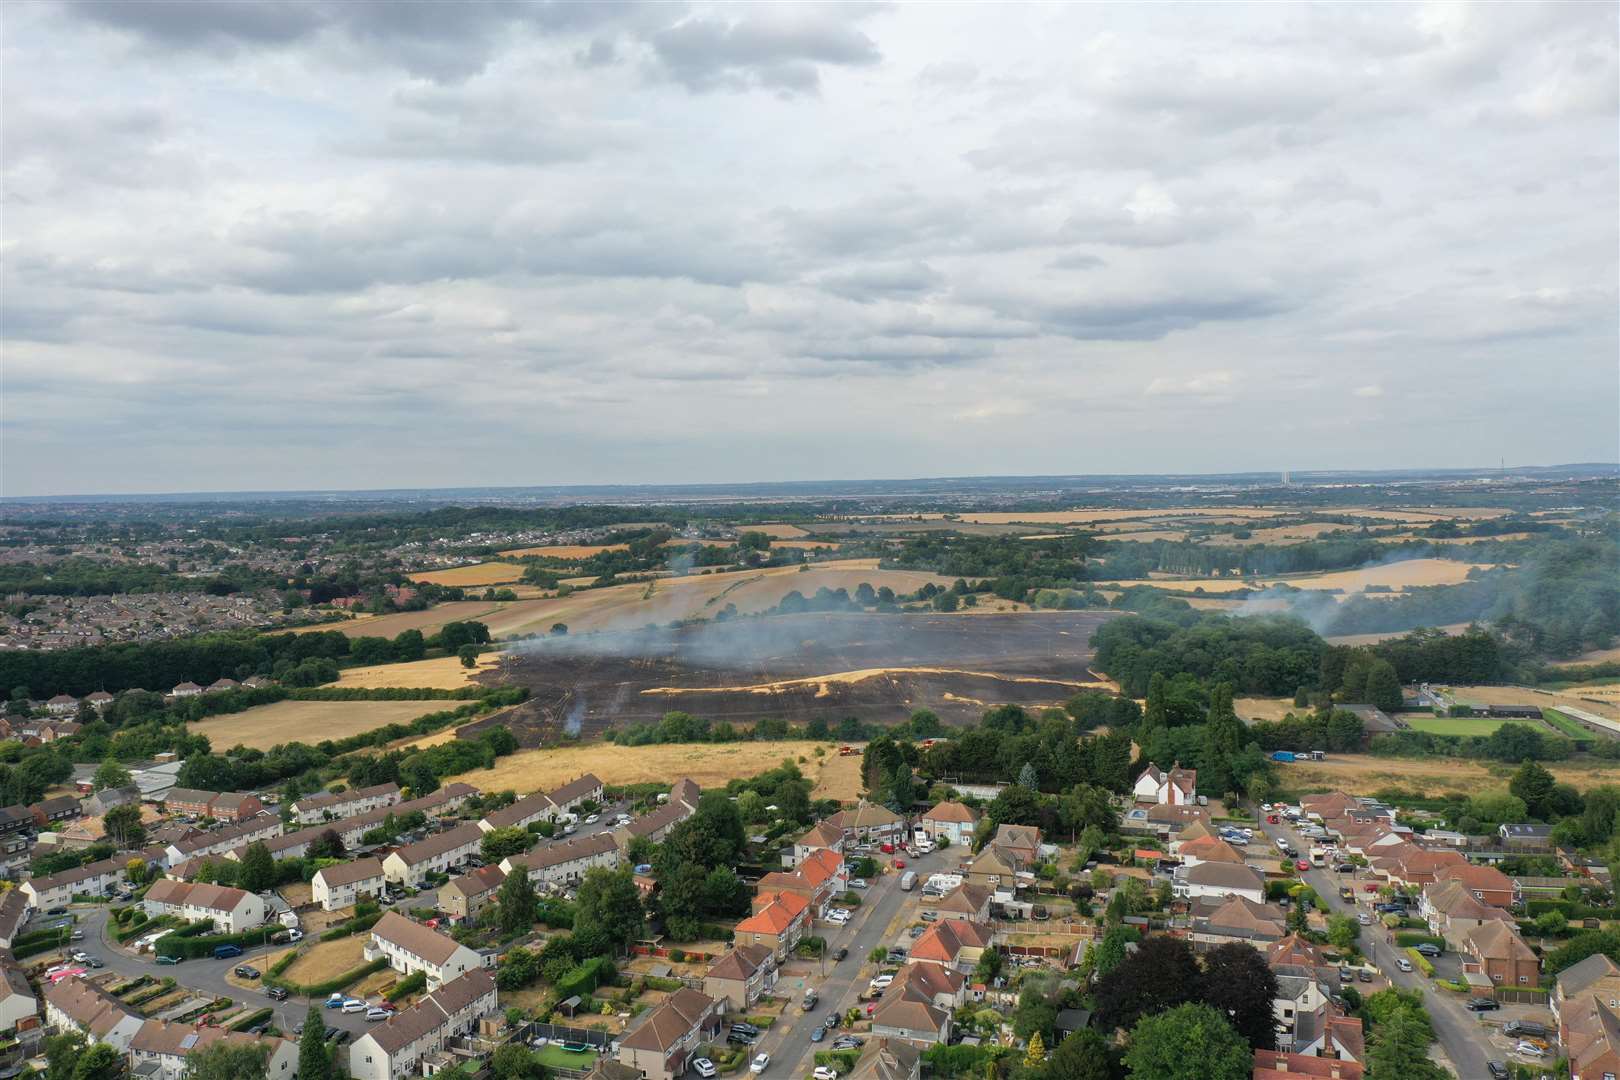 Huge plumes of smoke were seen rising from the field in Swanley. Picture: UKNIP